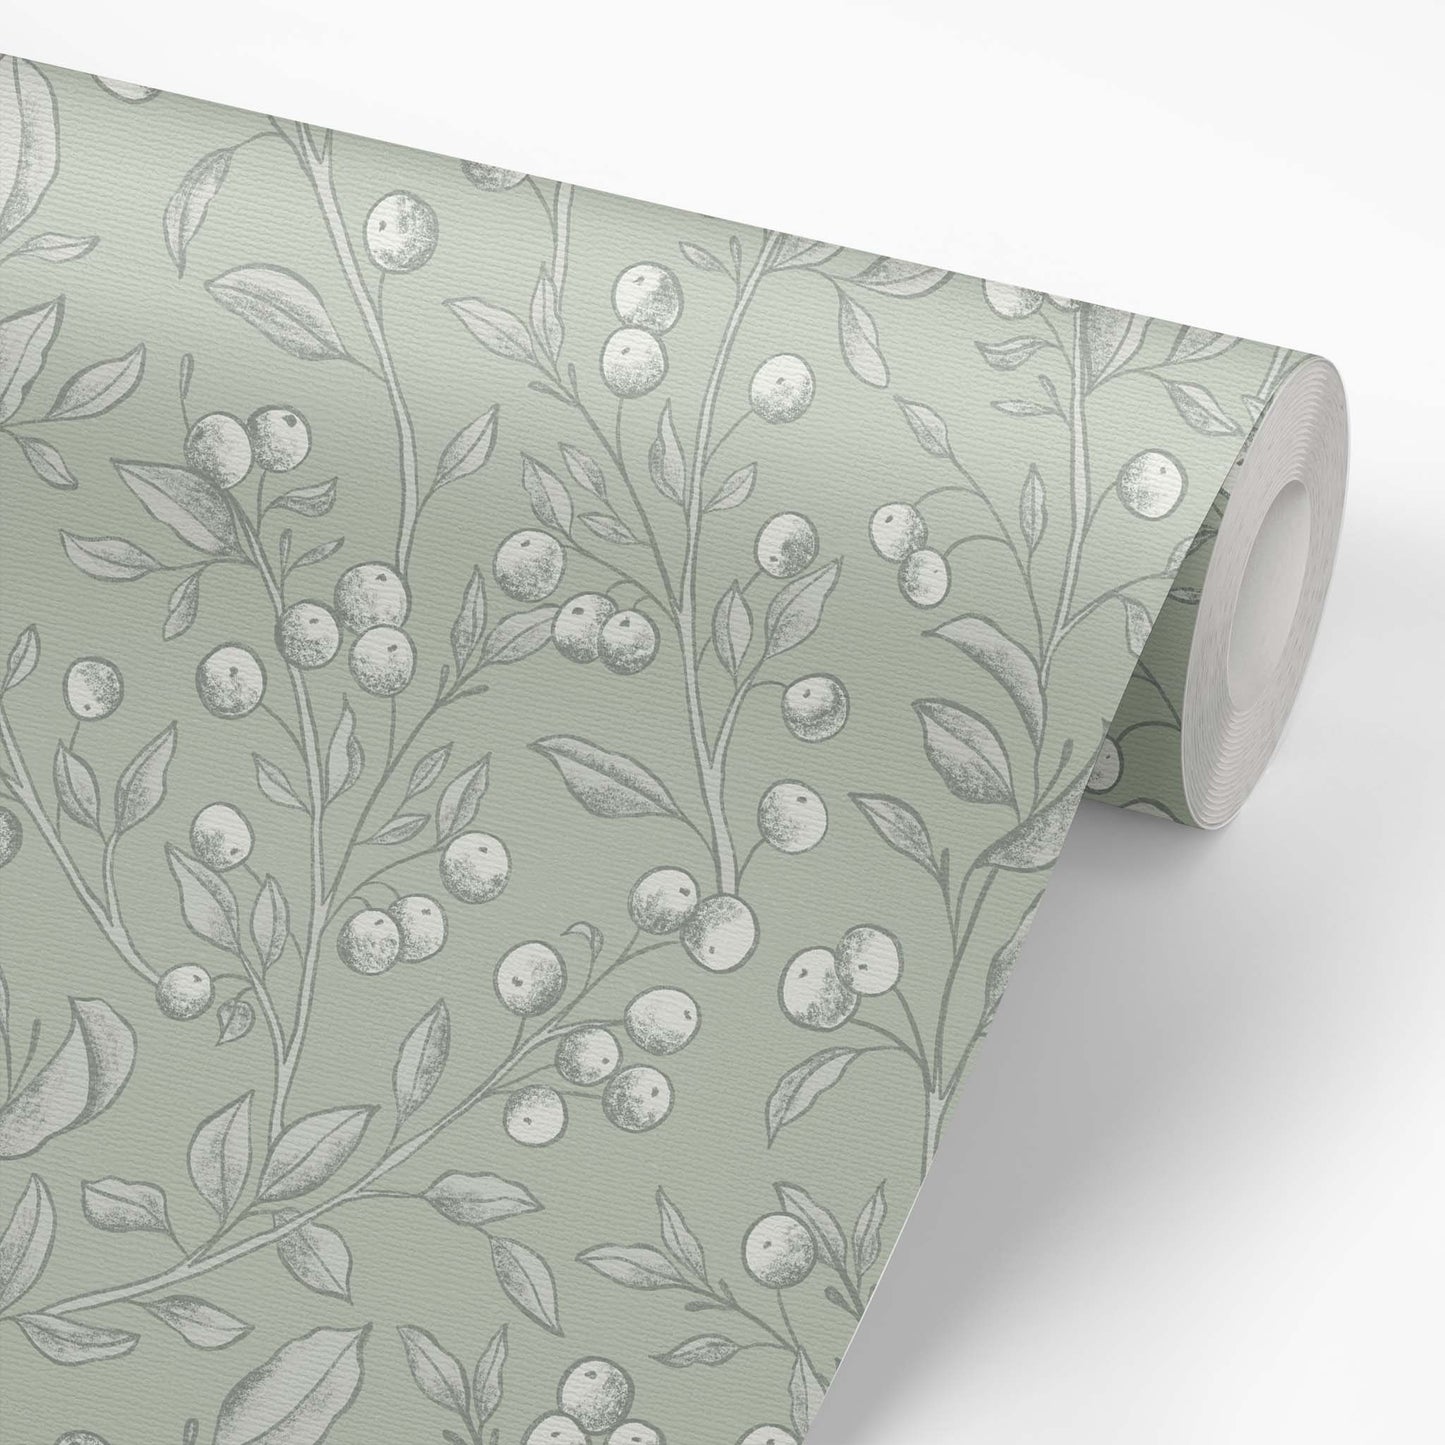 This wallpaper roll preview of our Berries Wallpaper in Light Sage shows our peel and stick, removable wallpaper with hand-drawn sketched berries in light sage and white by artist Mariah Cottrell.